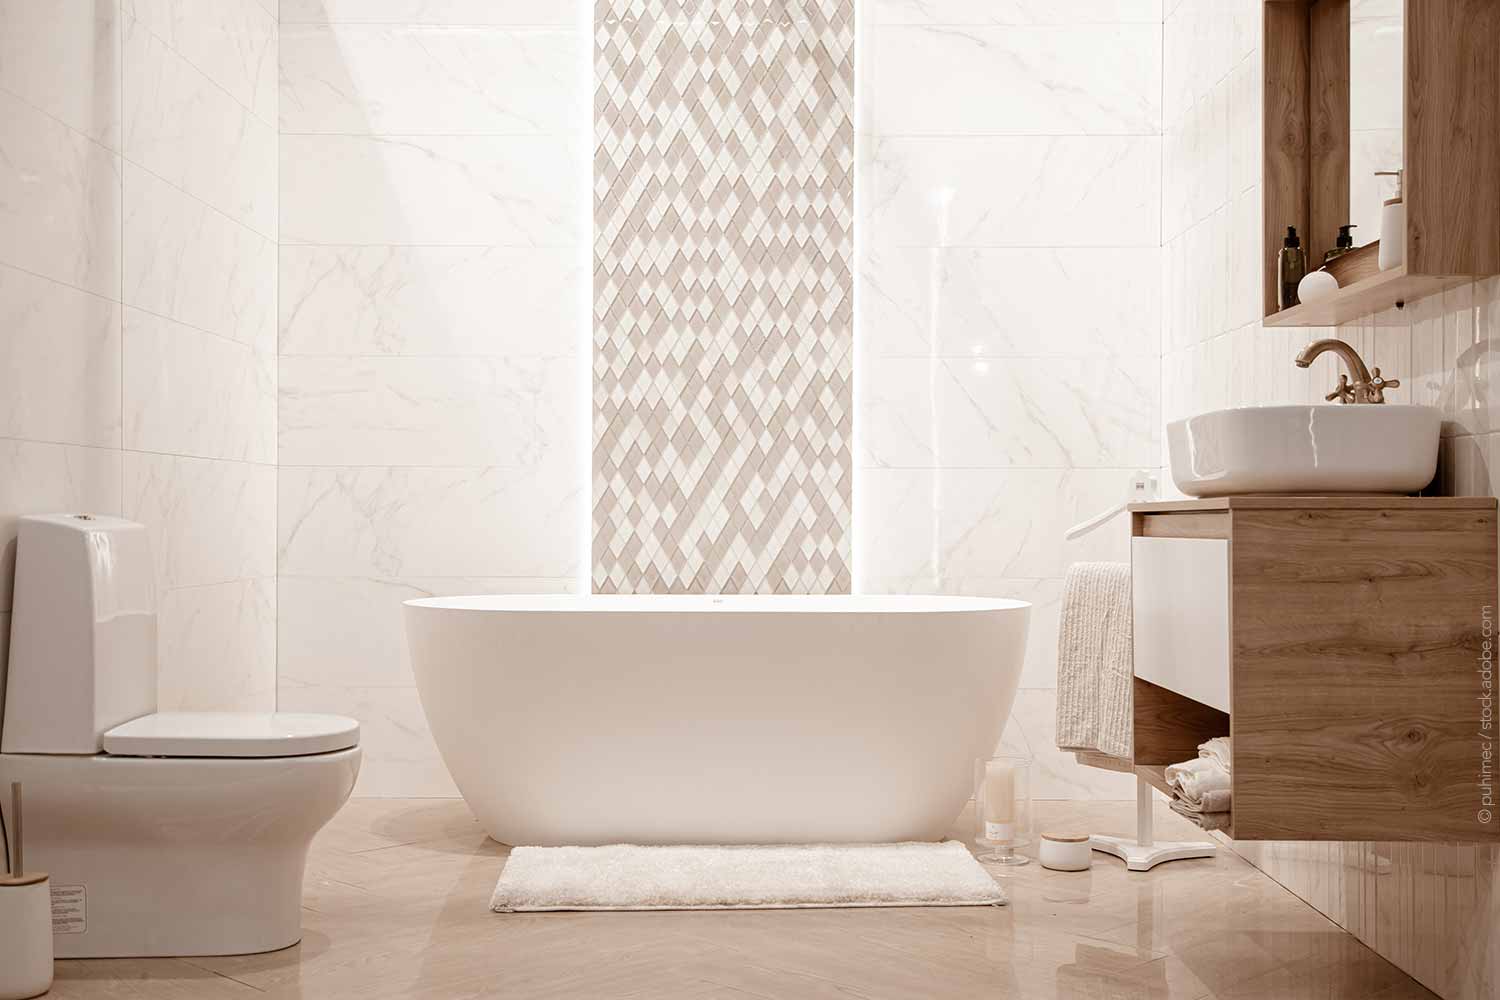 Warm tones, such as used in this modern bathroom interior, are one of the home design trends for 2024